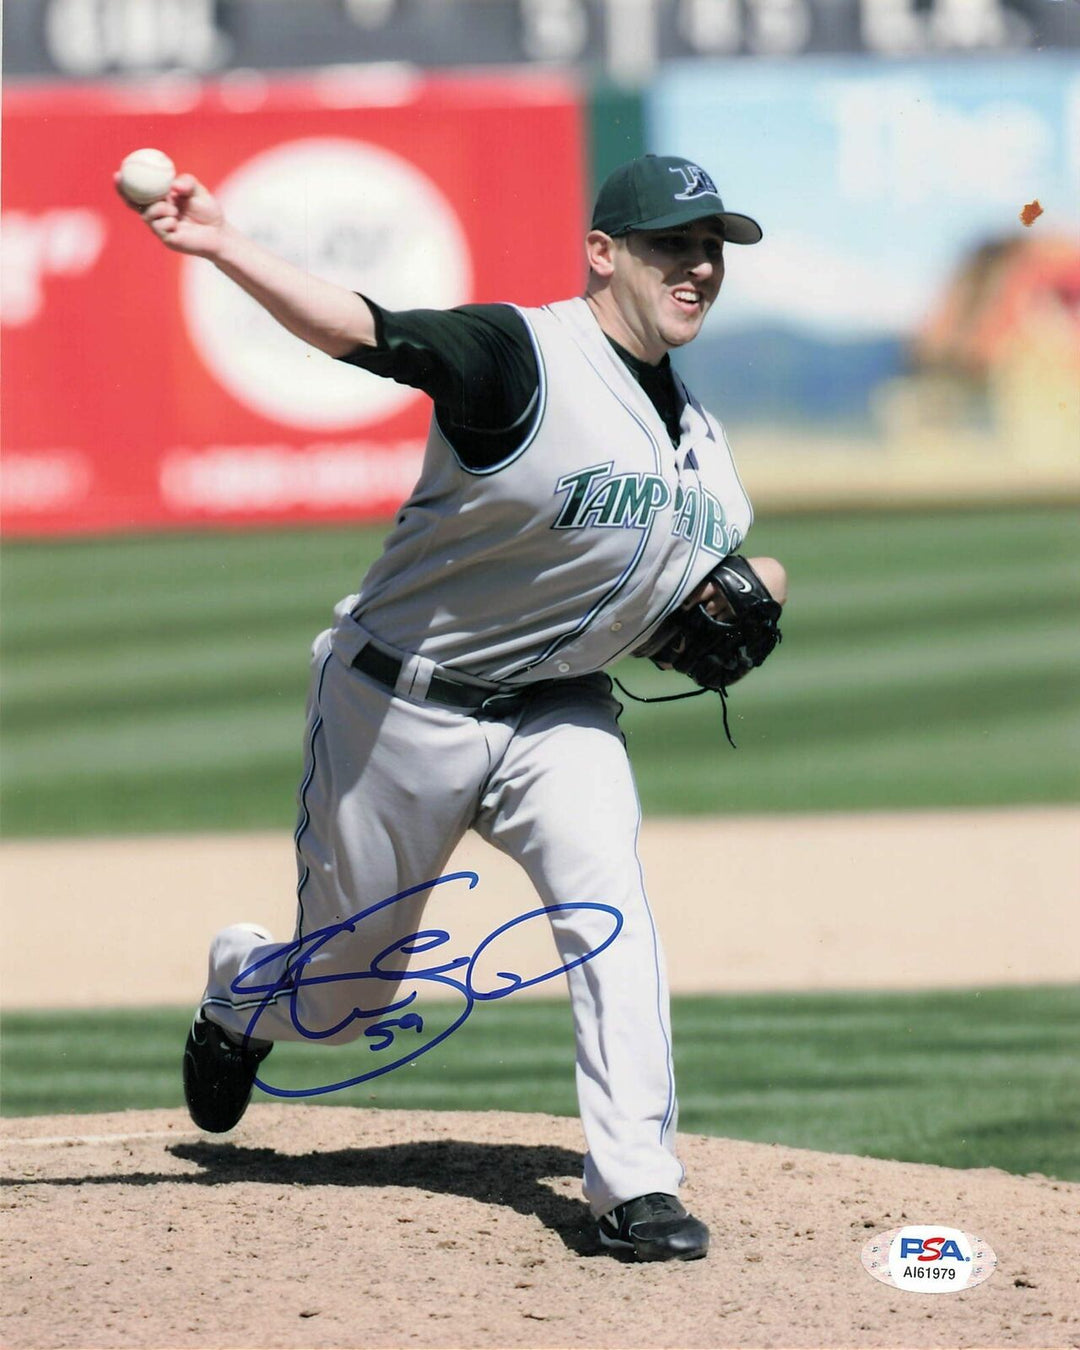 SHAWN CAMP signed 8x10 photo PSA/DNA Tampa Bay Rays Autographed Image 1